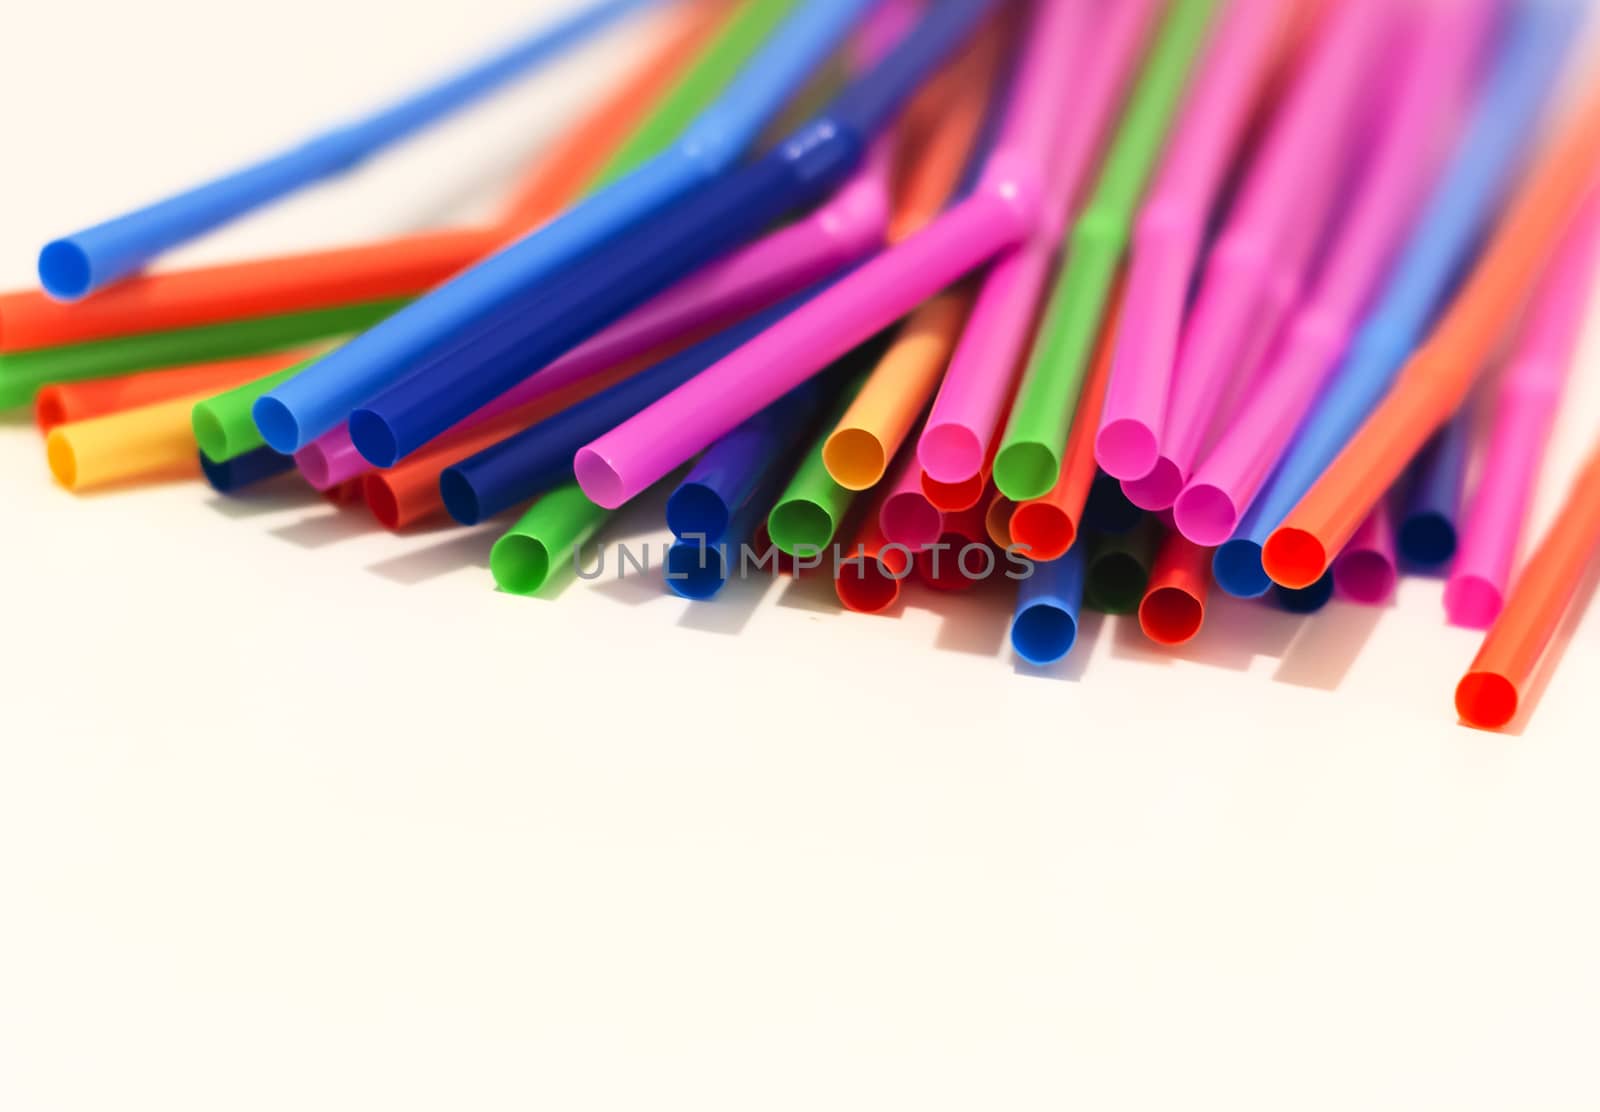 a group of colored plastic cocktail straws. Plastic and non-recyclable materials. Pollution and environmental issues